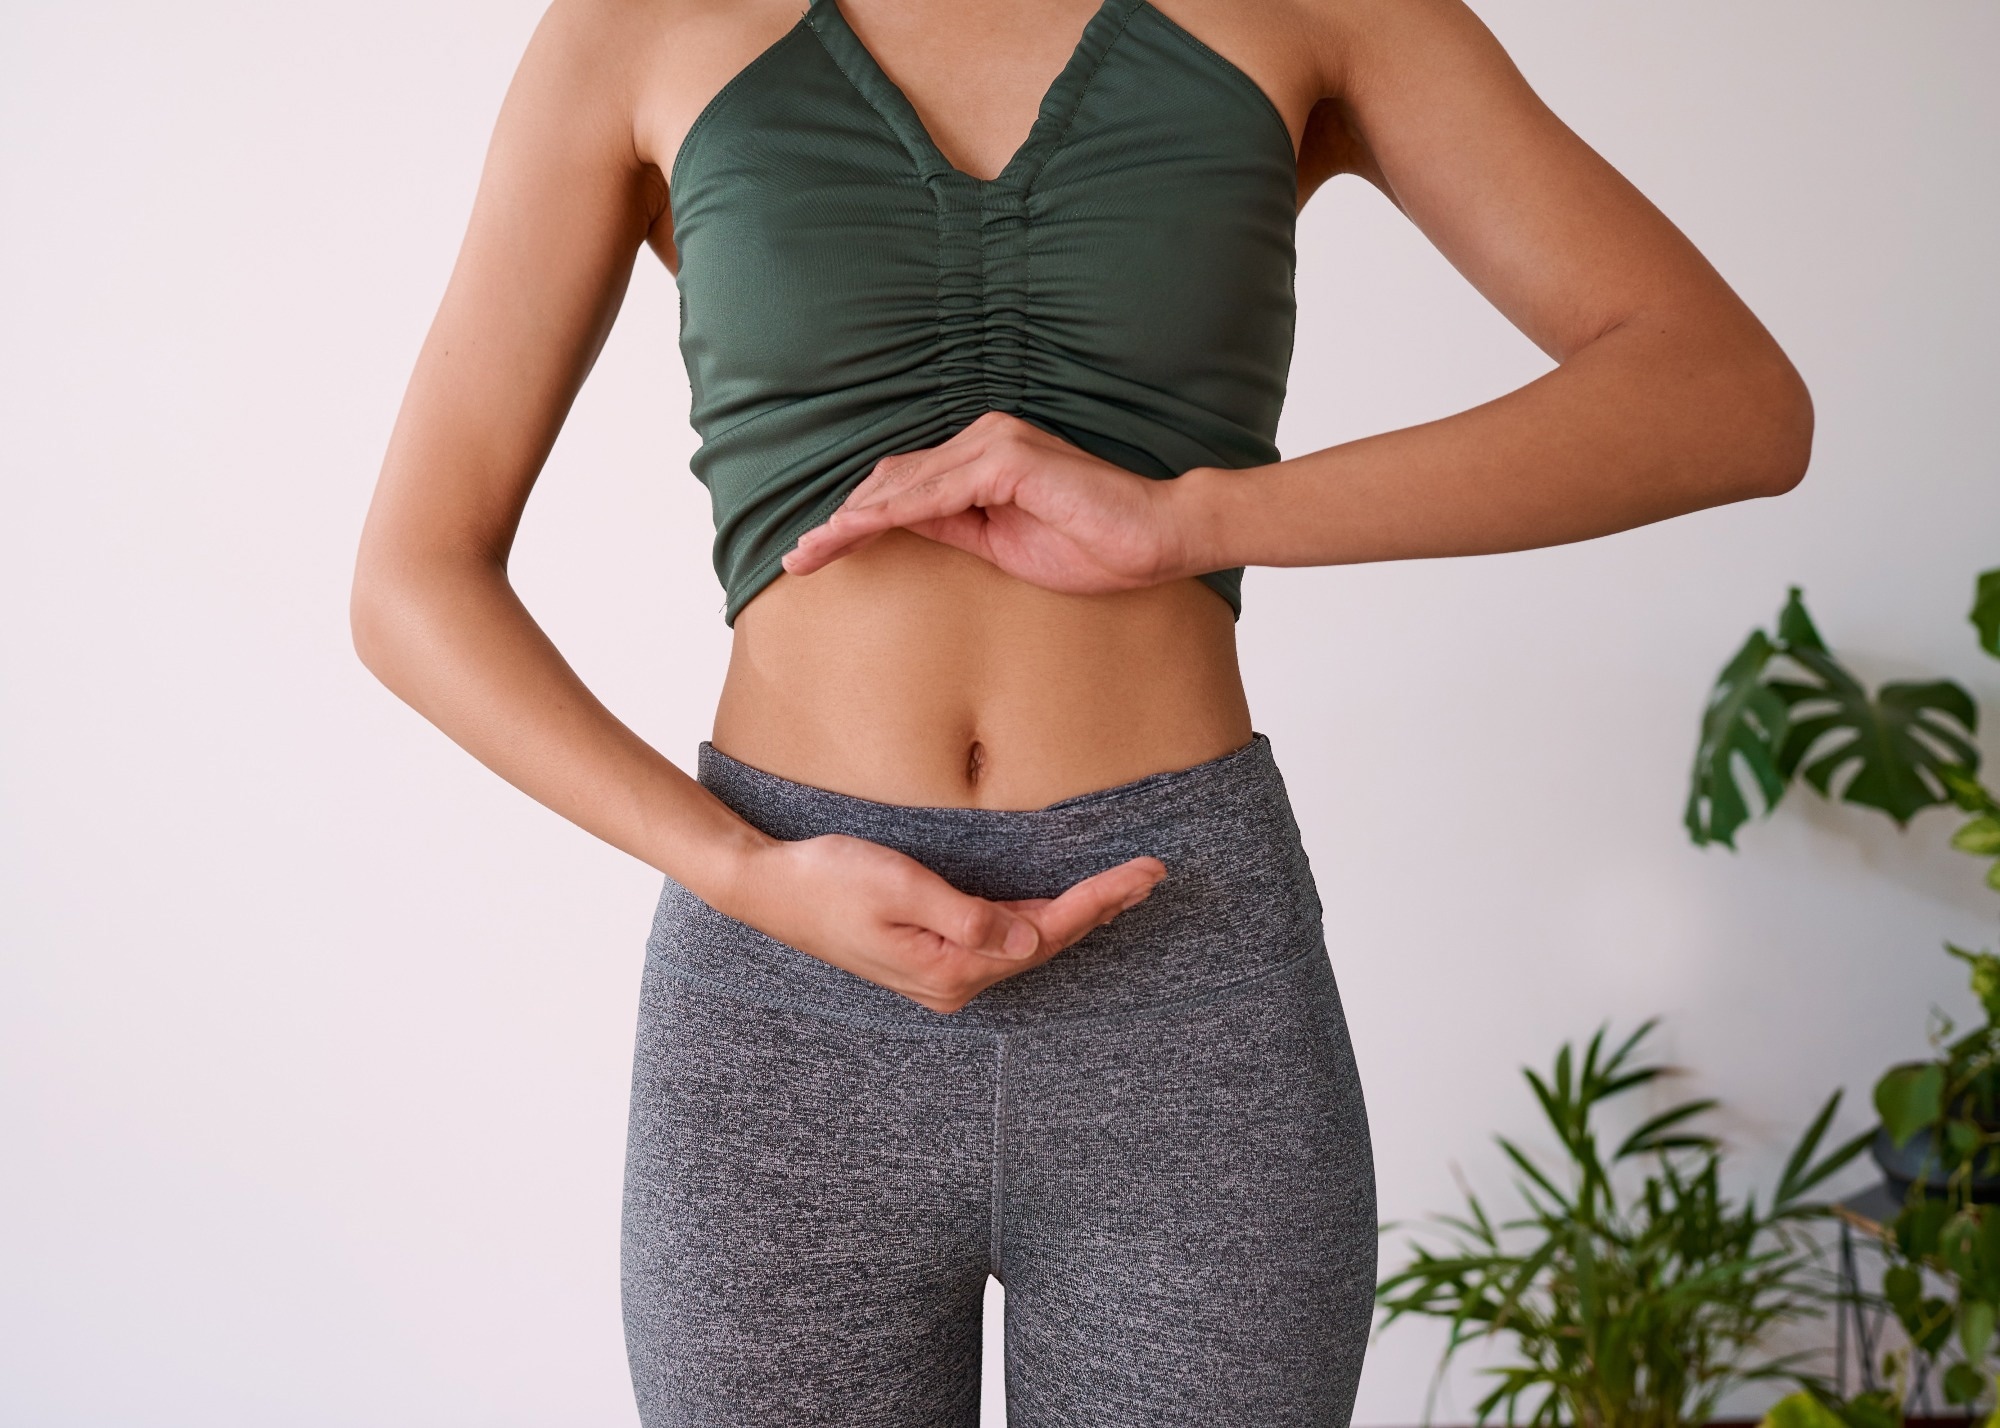 The microbiota connection, gut health linked to metabolic syndrome  prevalence